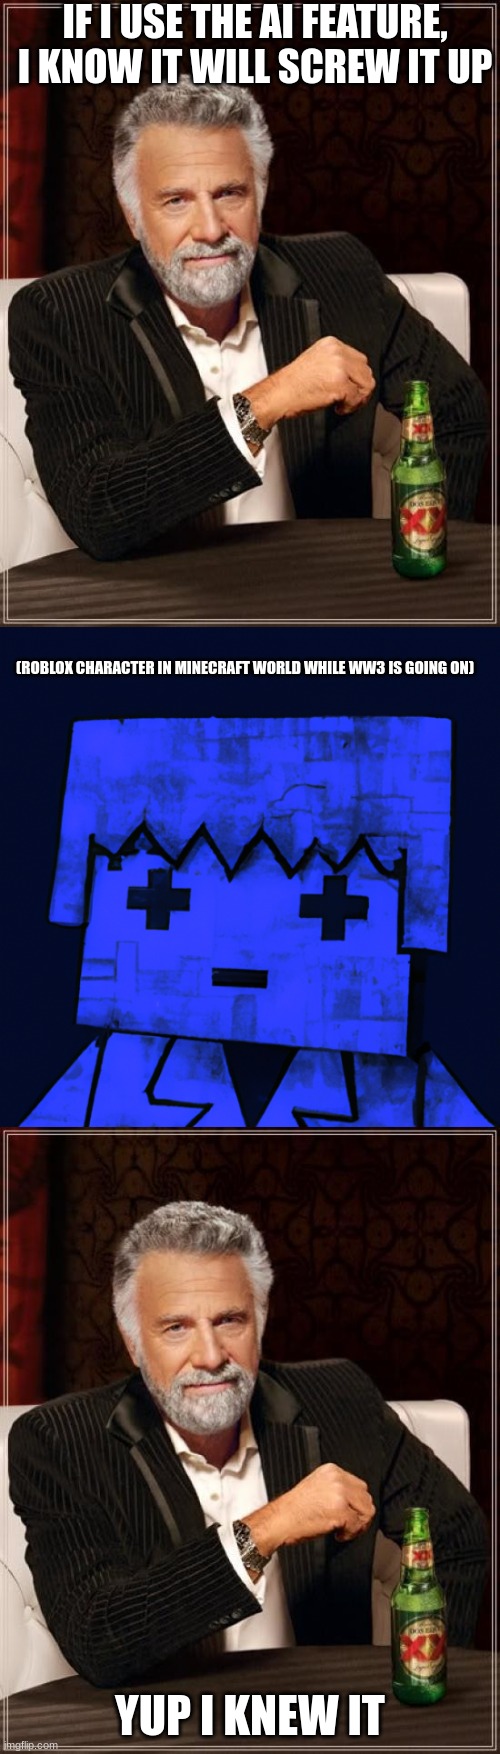 AI is good but also bad lol | IF I USE THE AI FEATURE, I KNOW IT WILL SCREW IT UP; (ROBLOX CHARACTER IN MINECRAFT WORLD WHILE WW3 IS GOING ON); YUP I KNEW IT | image tagged in memes,the most interesting man in the world,roblox character in minecraft world while ww3 is going on,funny | made w/ Imgflip meme maker